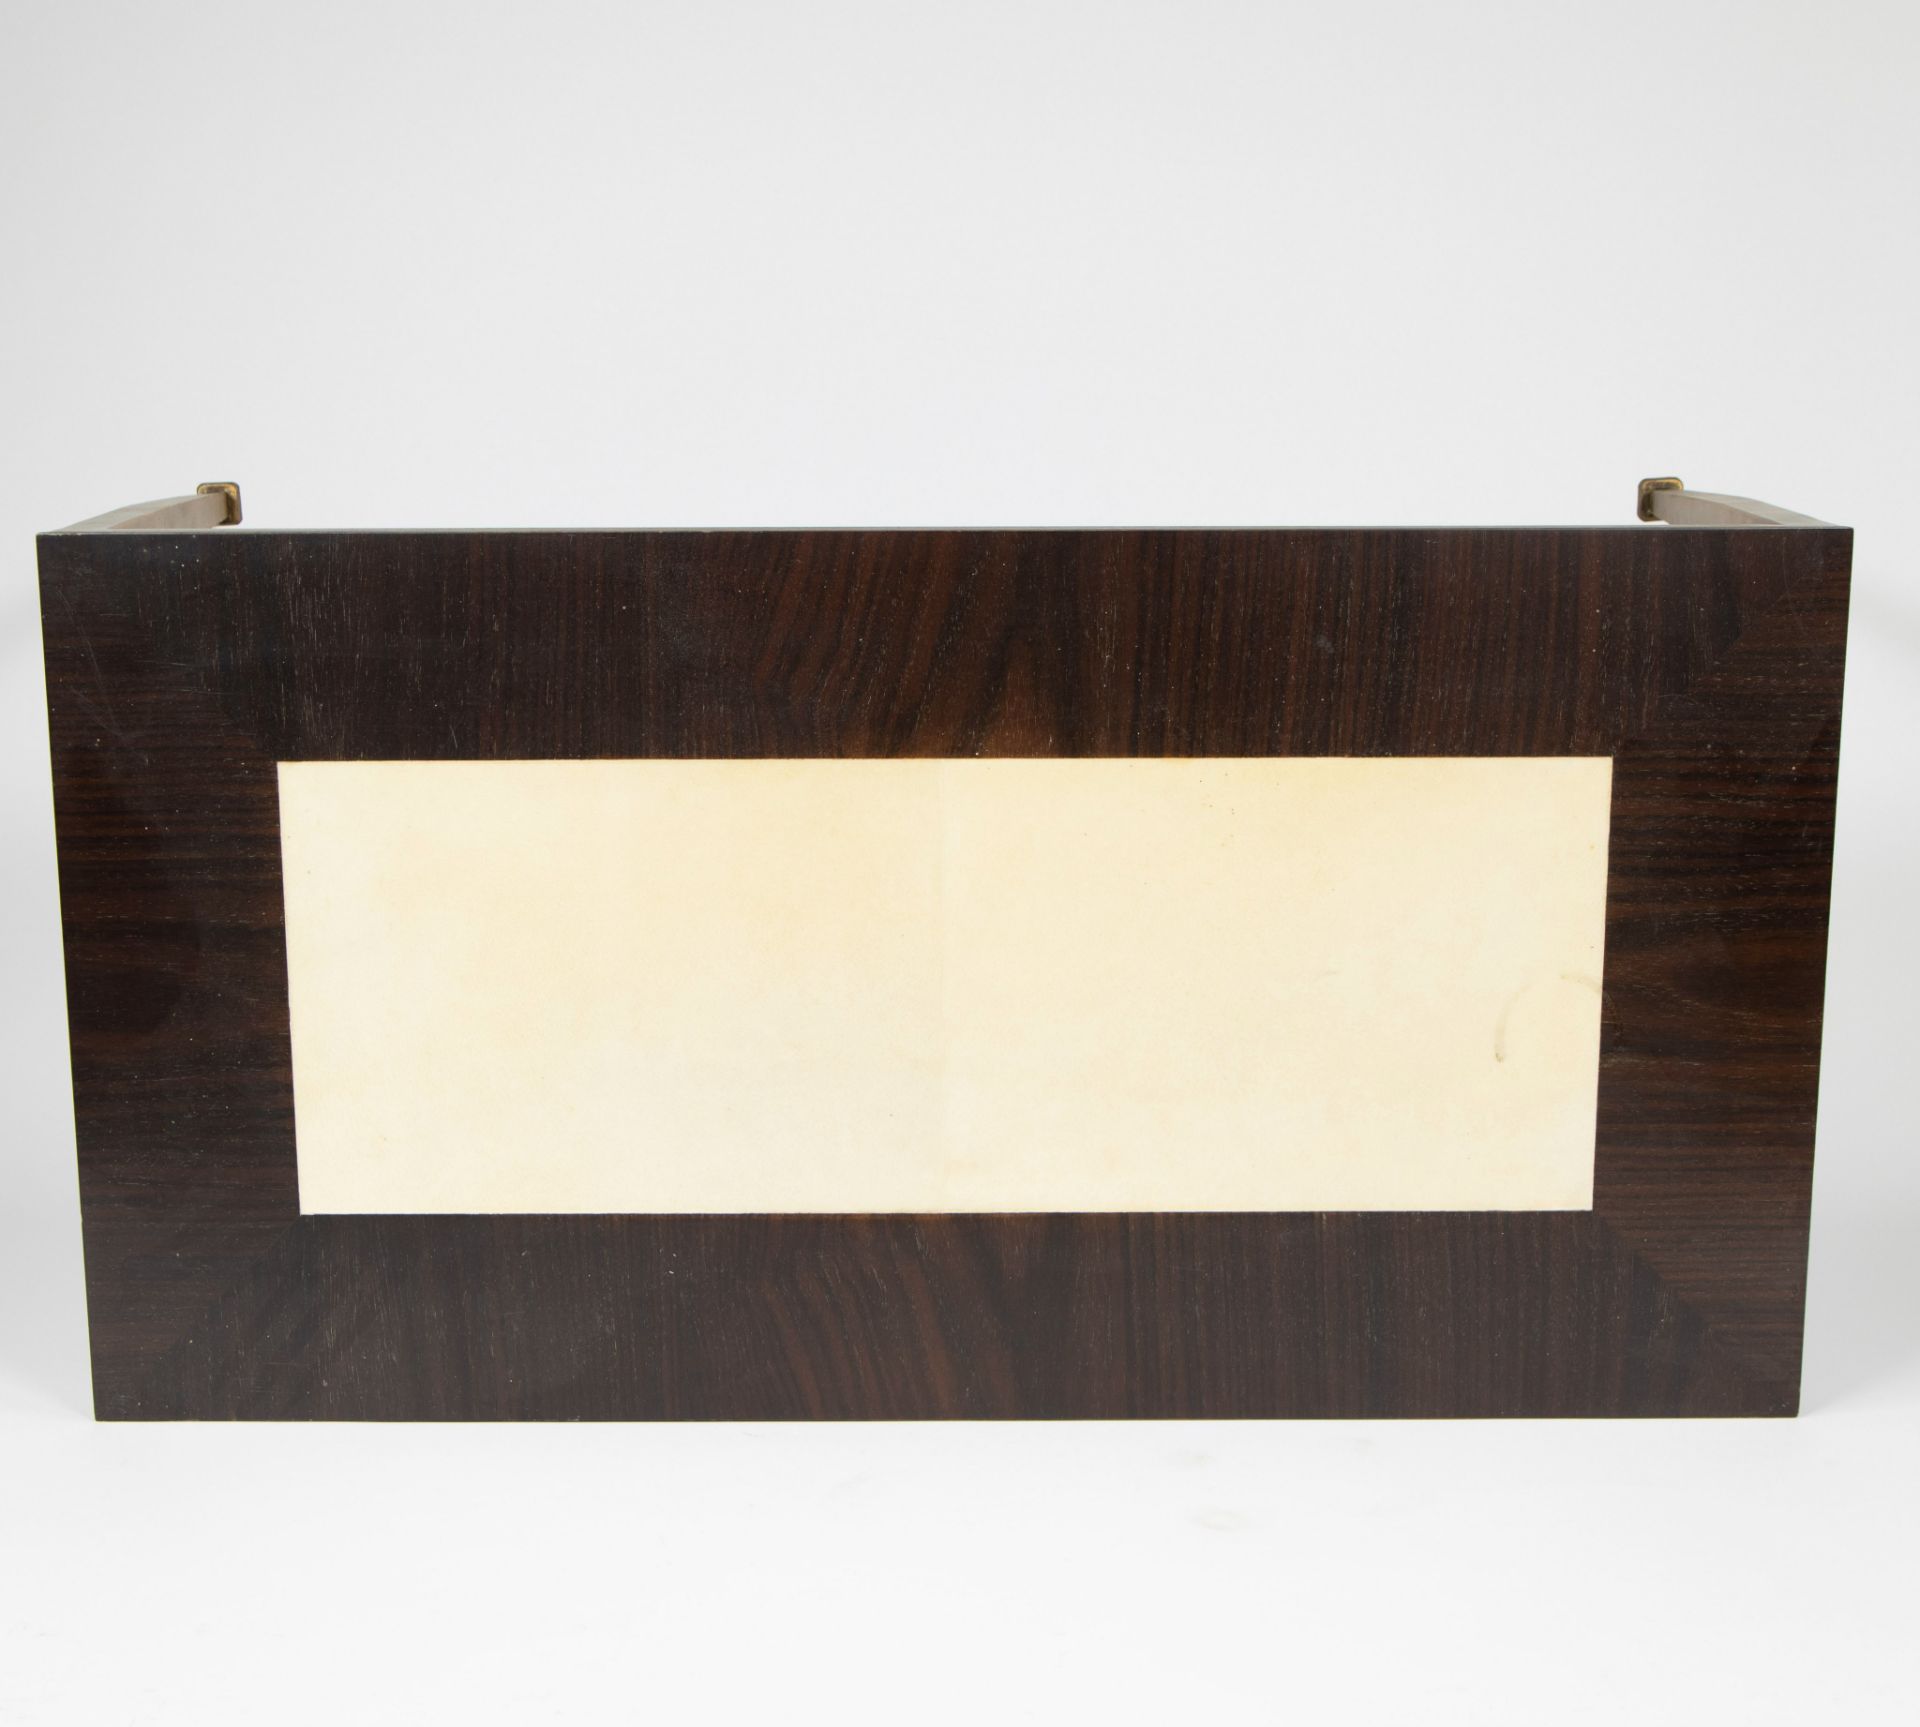 Vintage coffee table with shagreen leather and tropical wood - Image 3 of 3